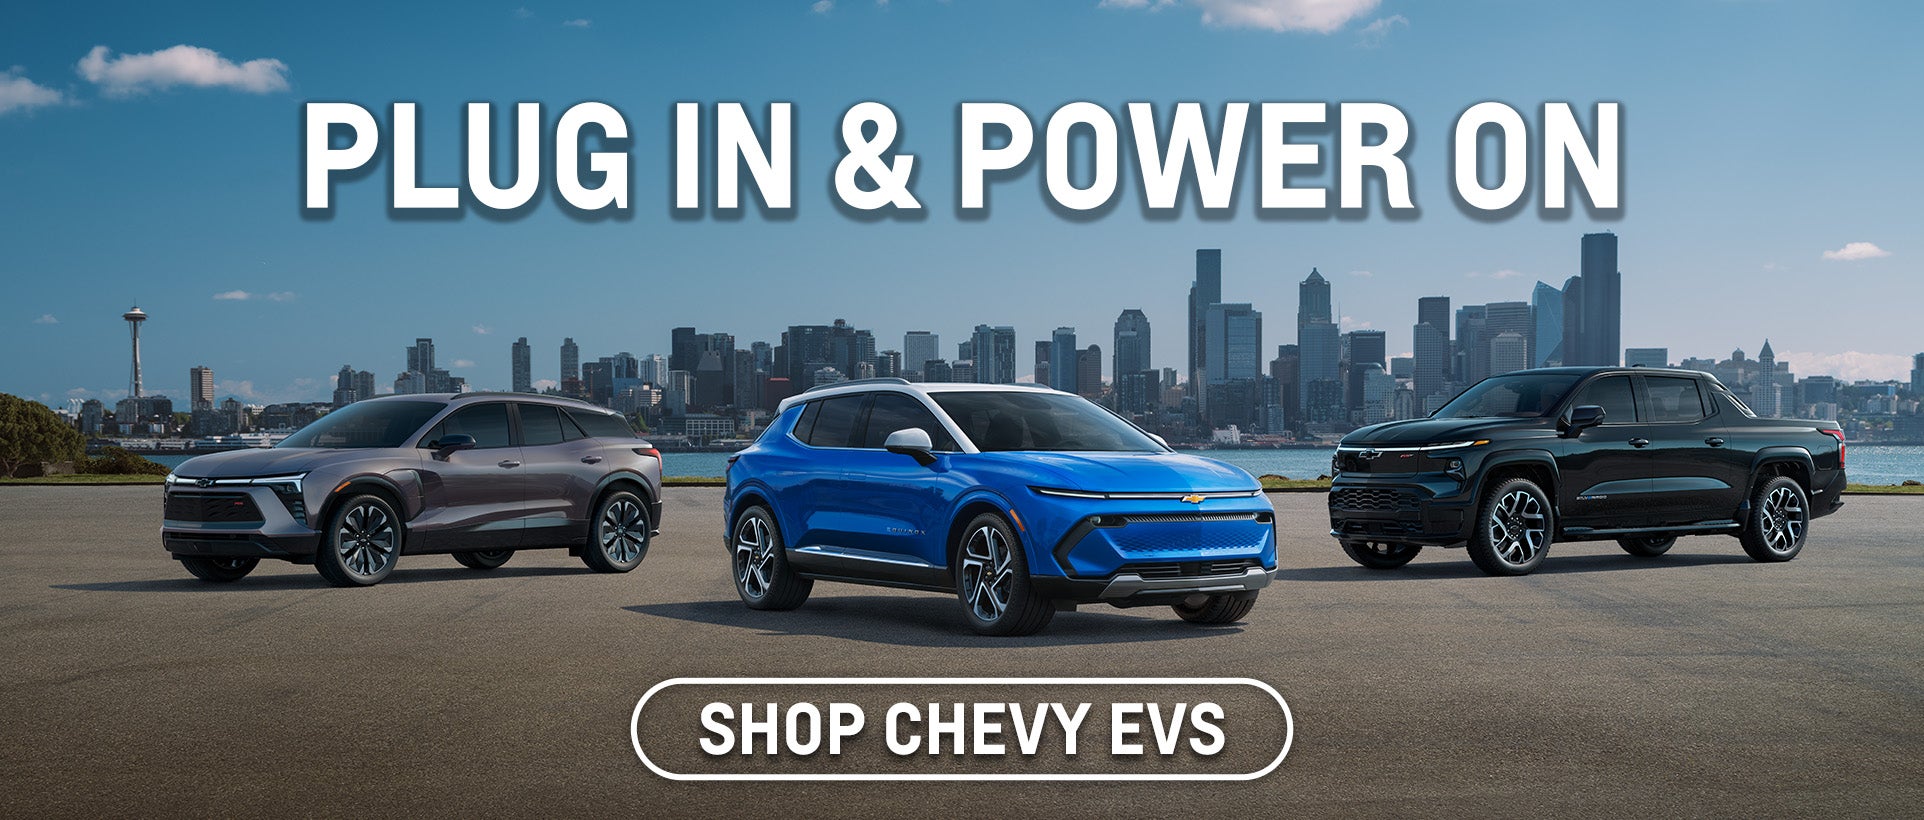 Chevy Electric Vehicles